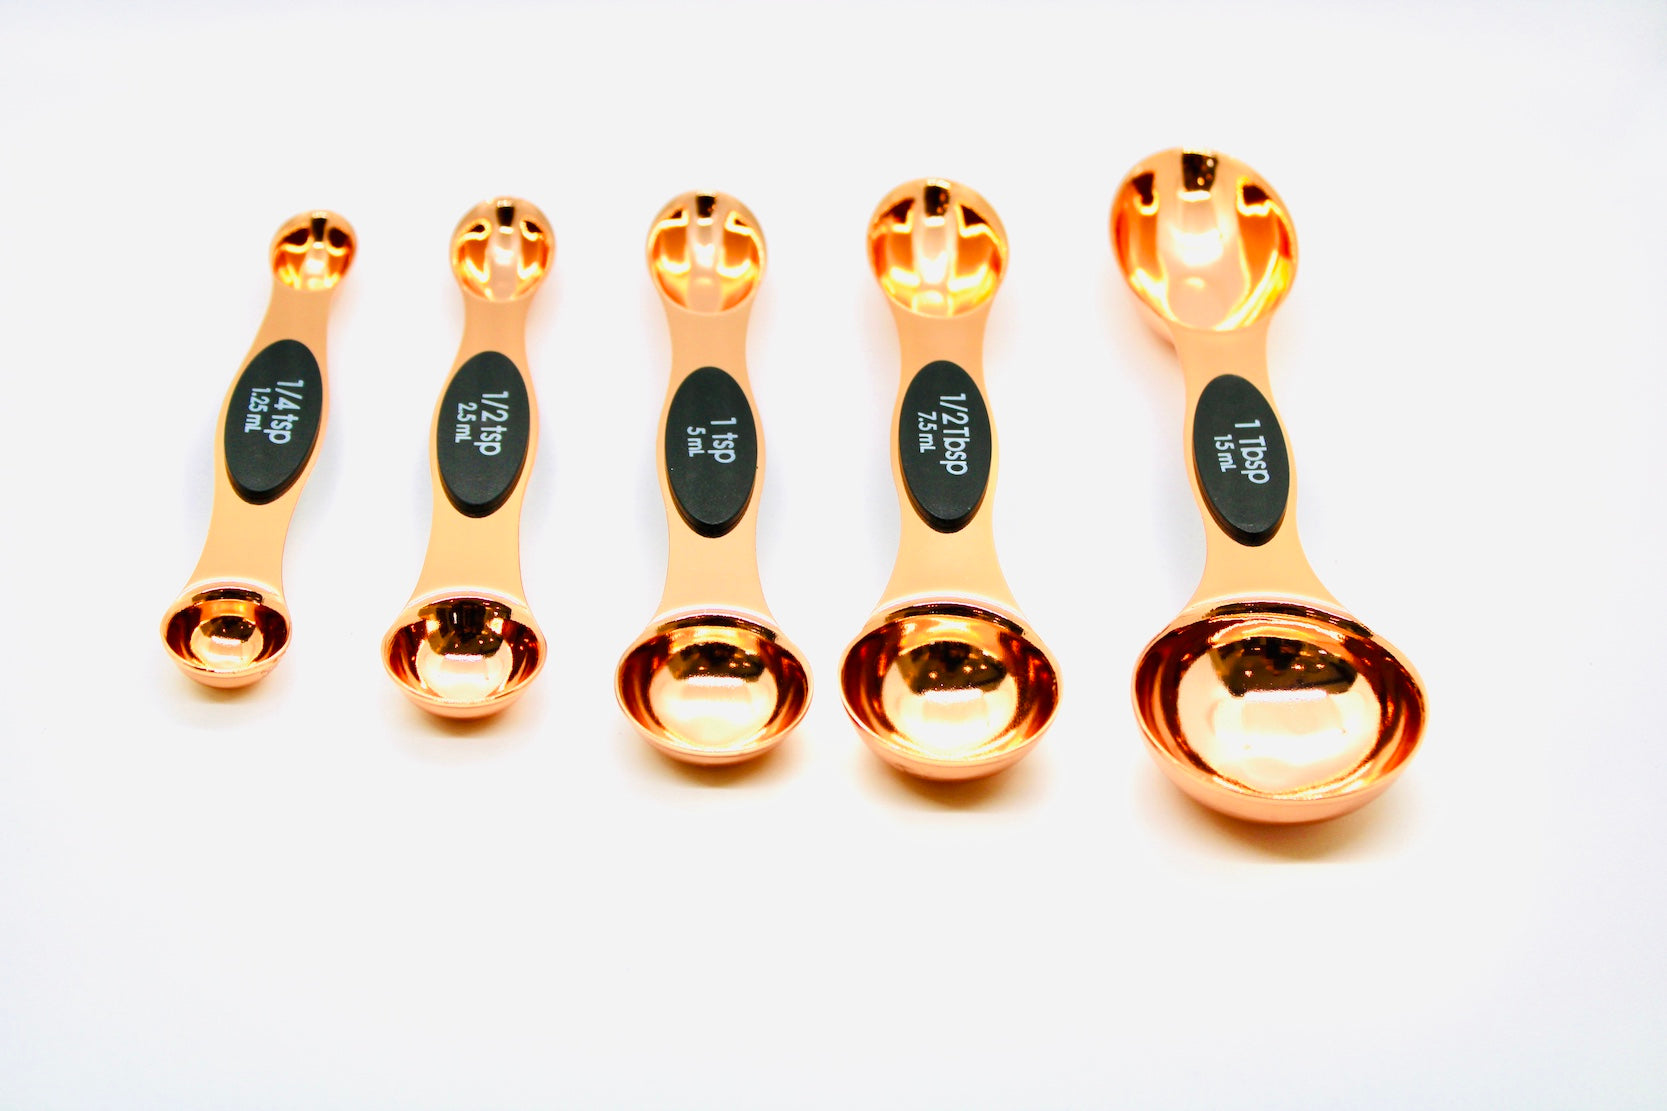 5 Piece Magnetic Measuring Spoon Set (Rose Gold)